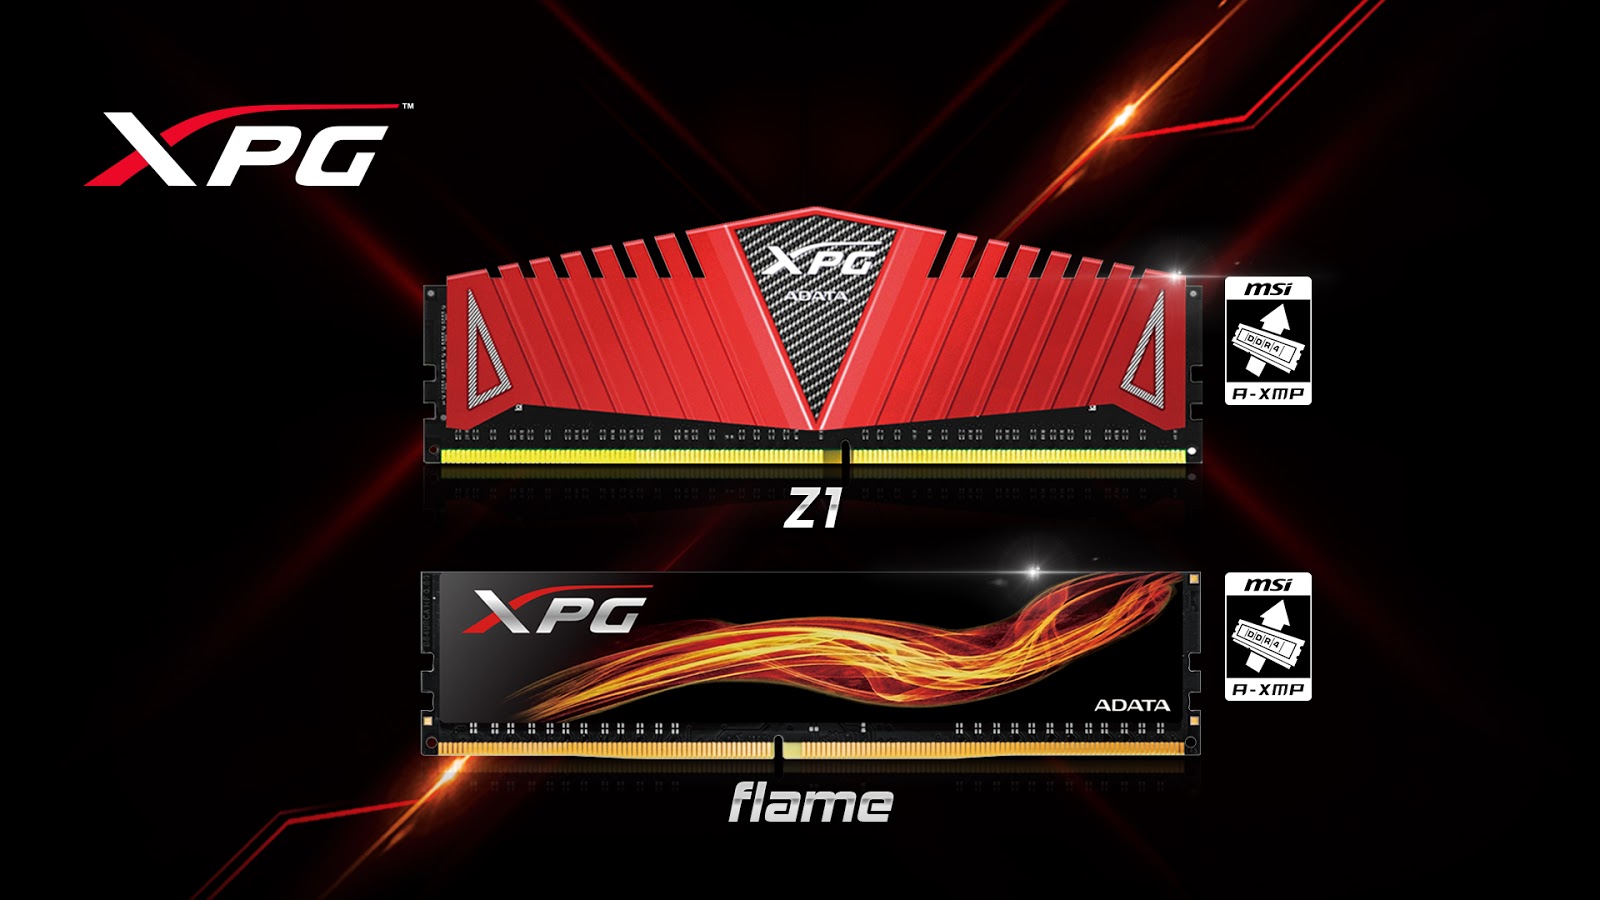 ADATA XPG Z1 and Flame DDR4 memory